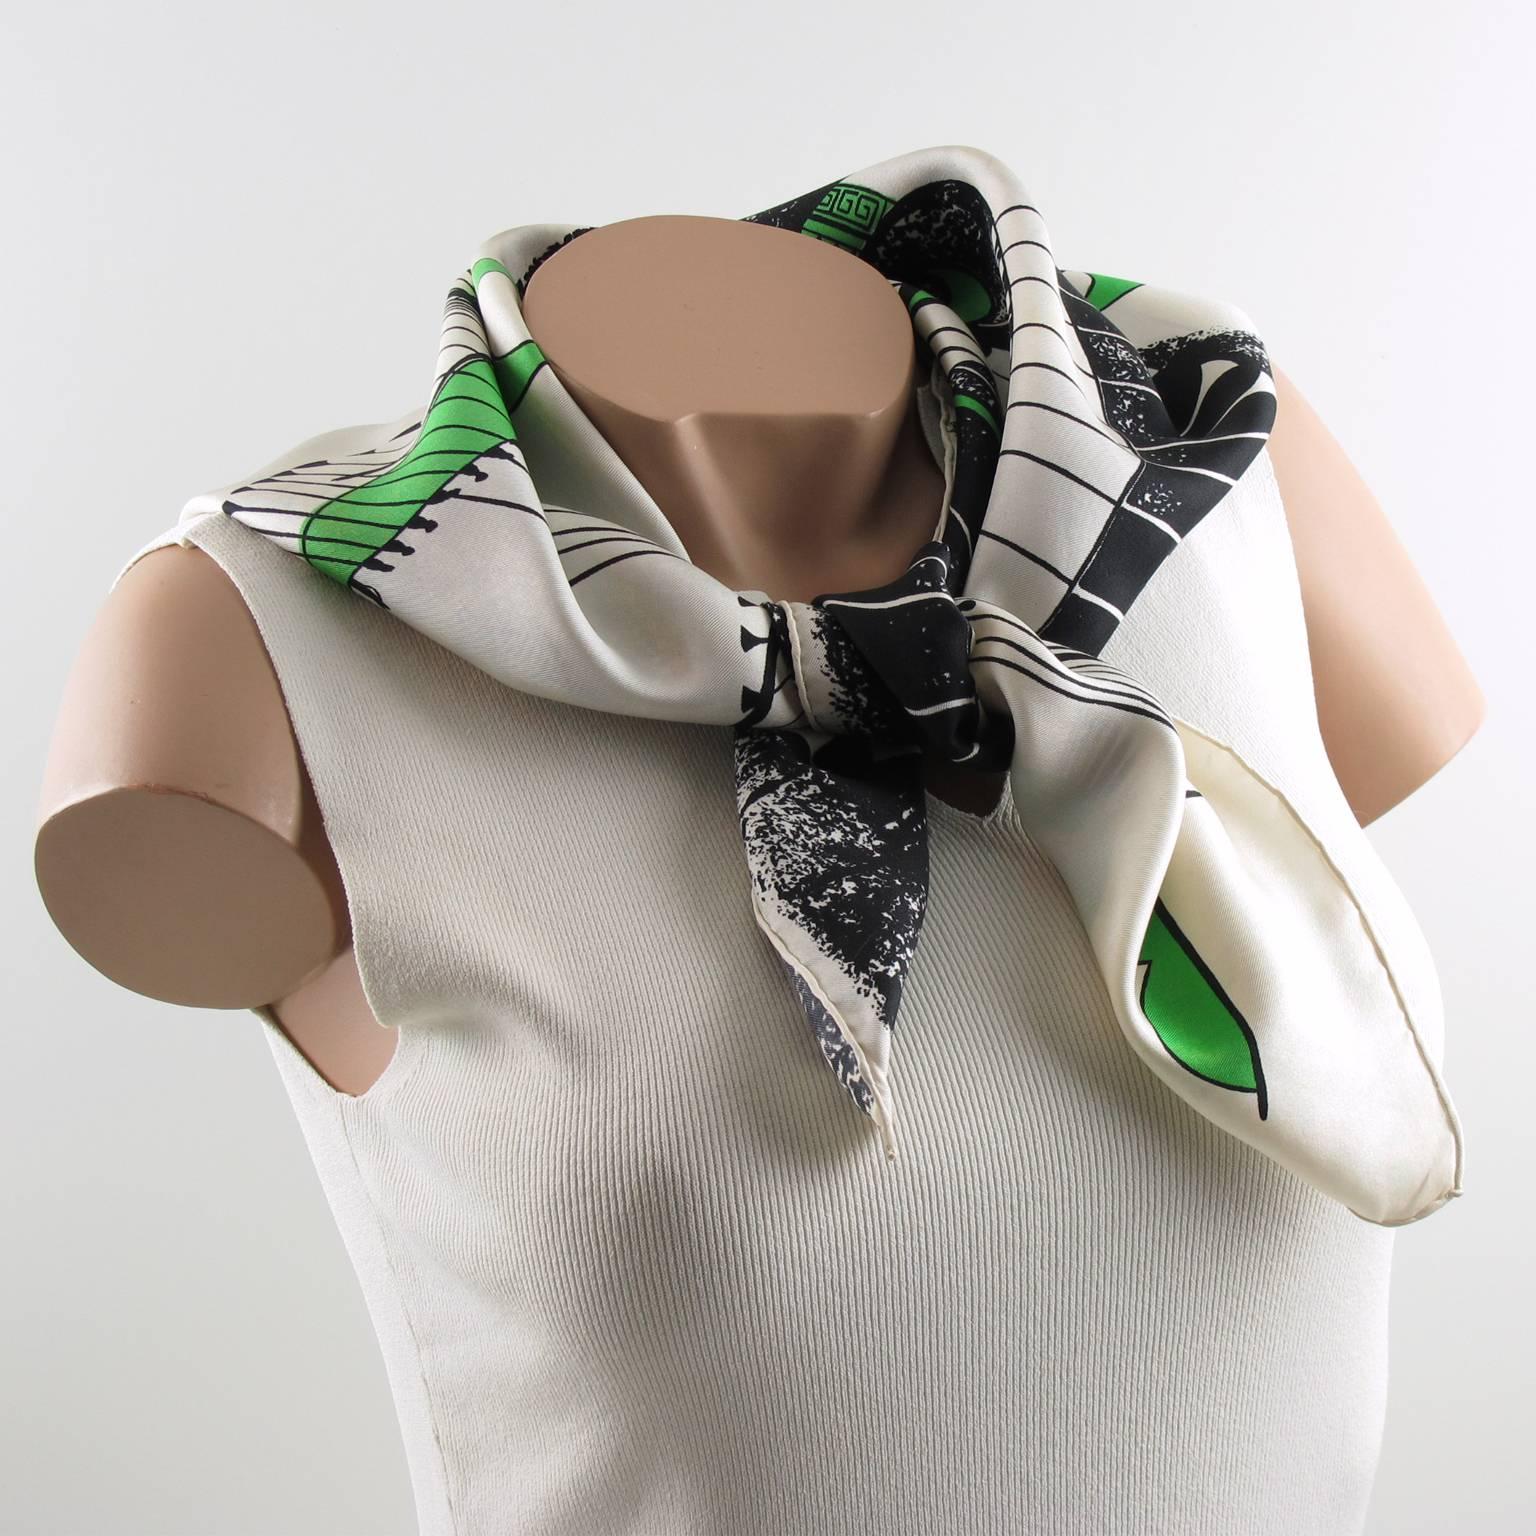 Rare 1960s French fashion designer Maggy Rouff Paris 100% pure silk scarf. Elegant scarf features modernist galley boats with stylized design and is depicted like a painting. The palette is one of bright green, black and off-white. Hand rolled